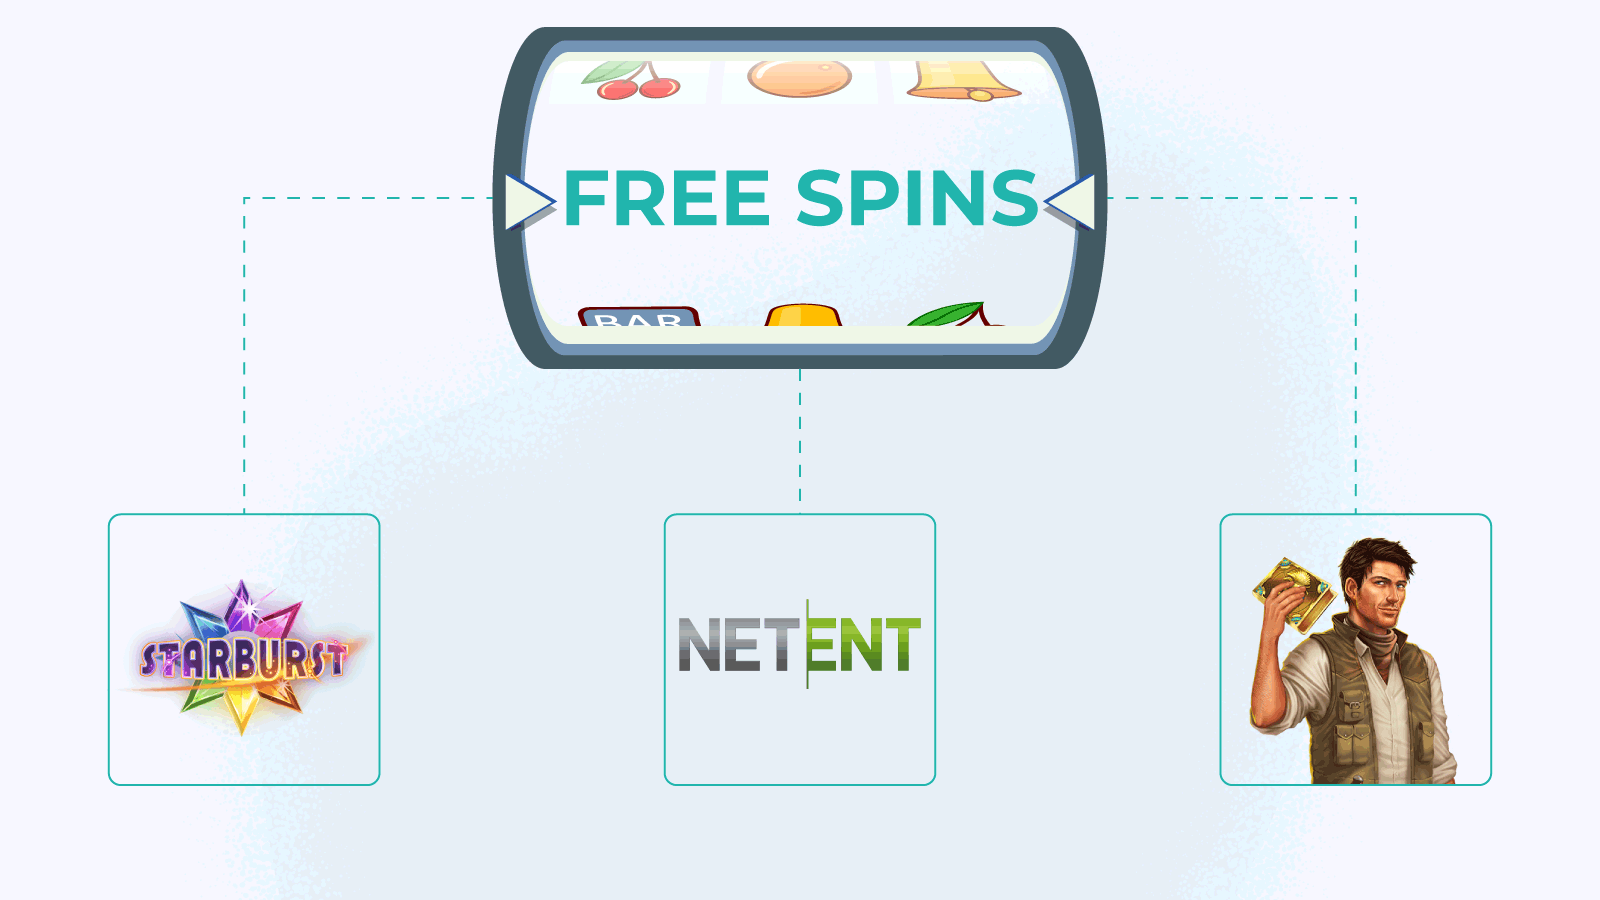 Free spins on specific gaming products